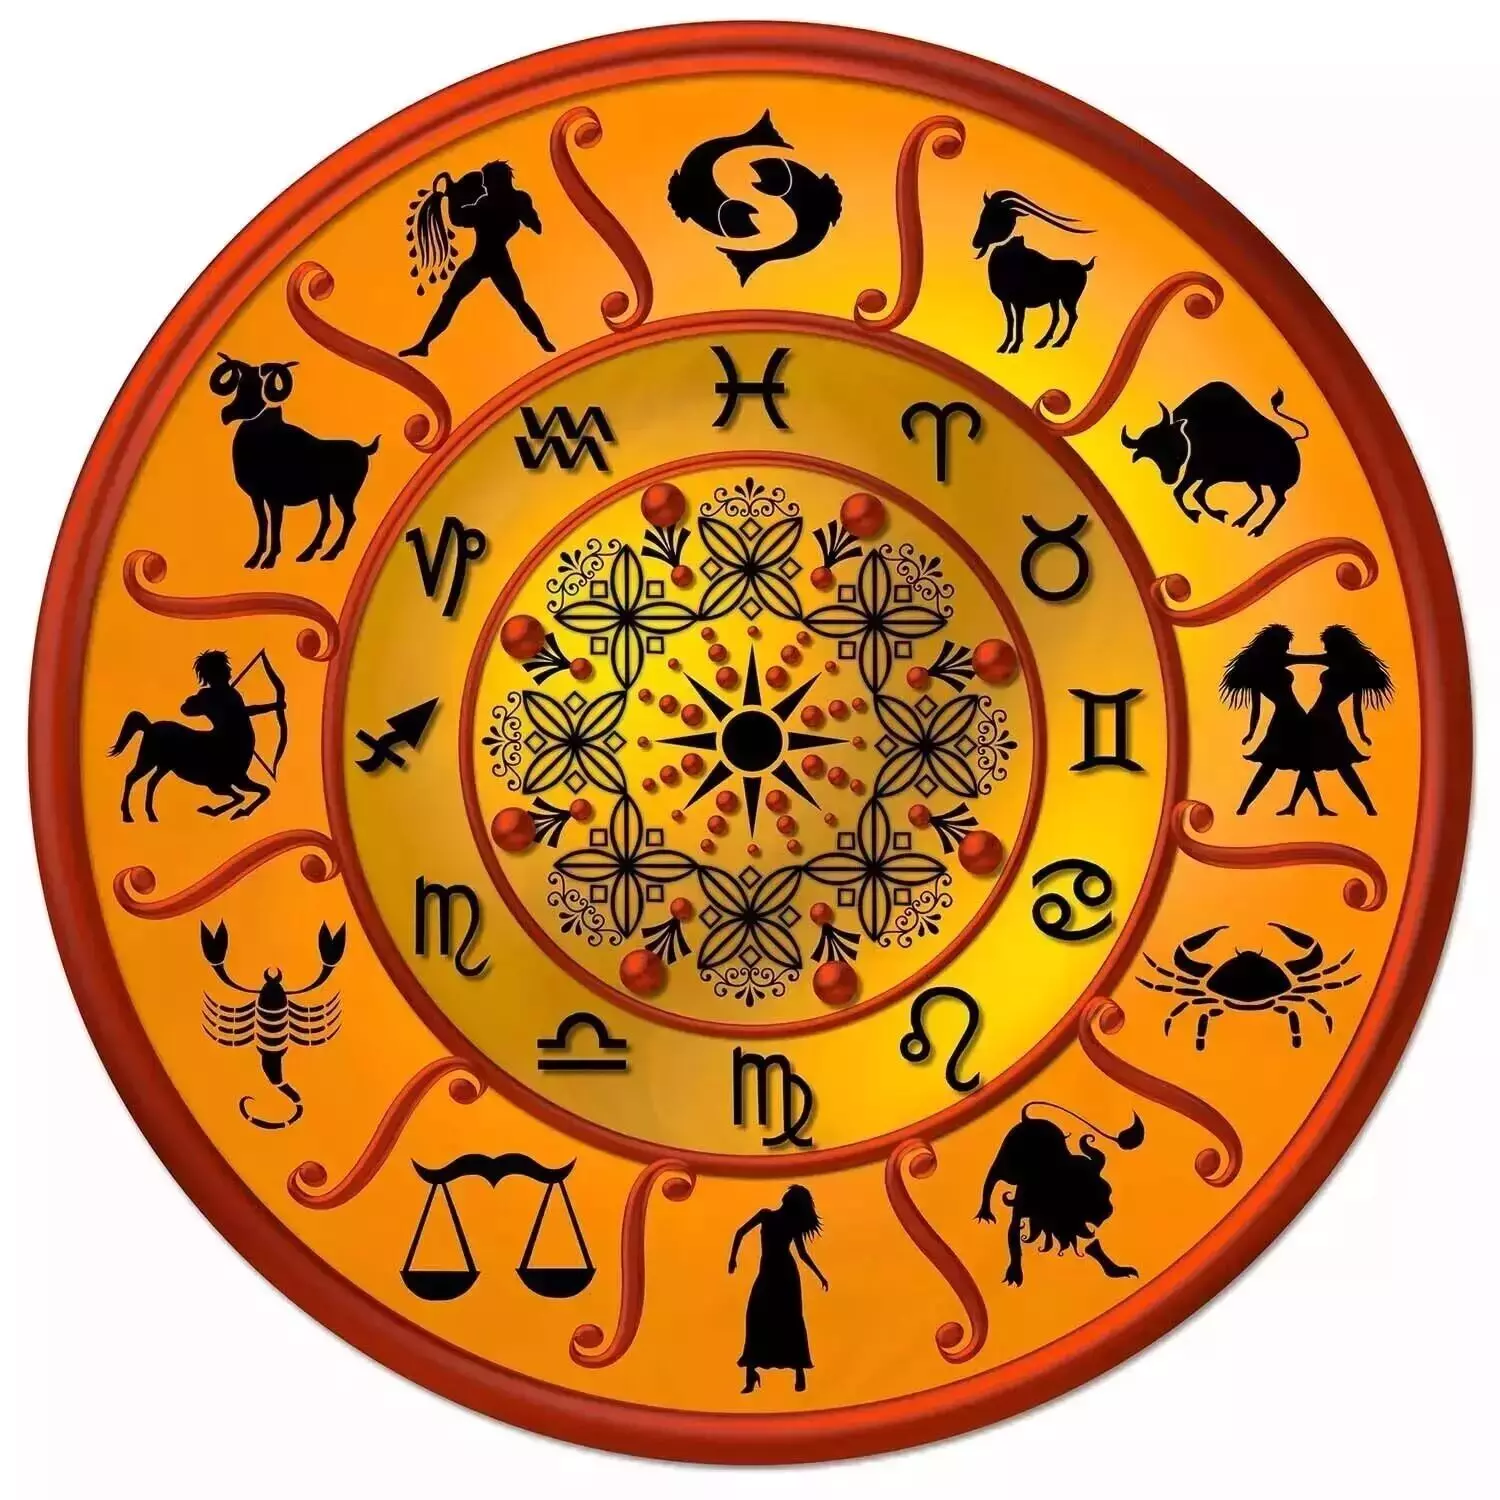 26 March  – Know your todays horoscope